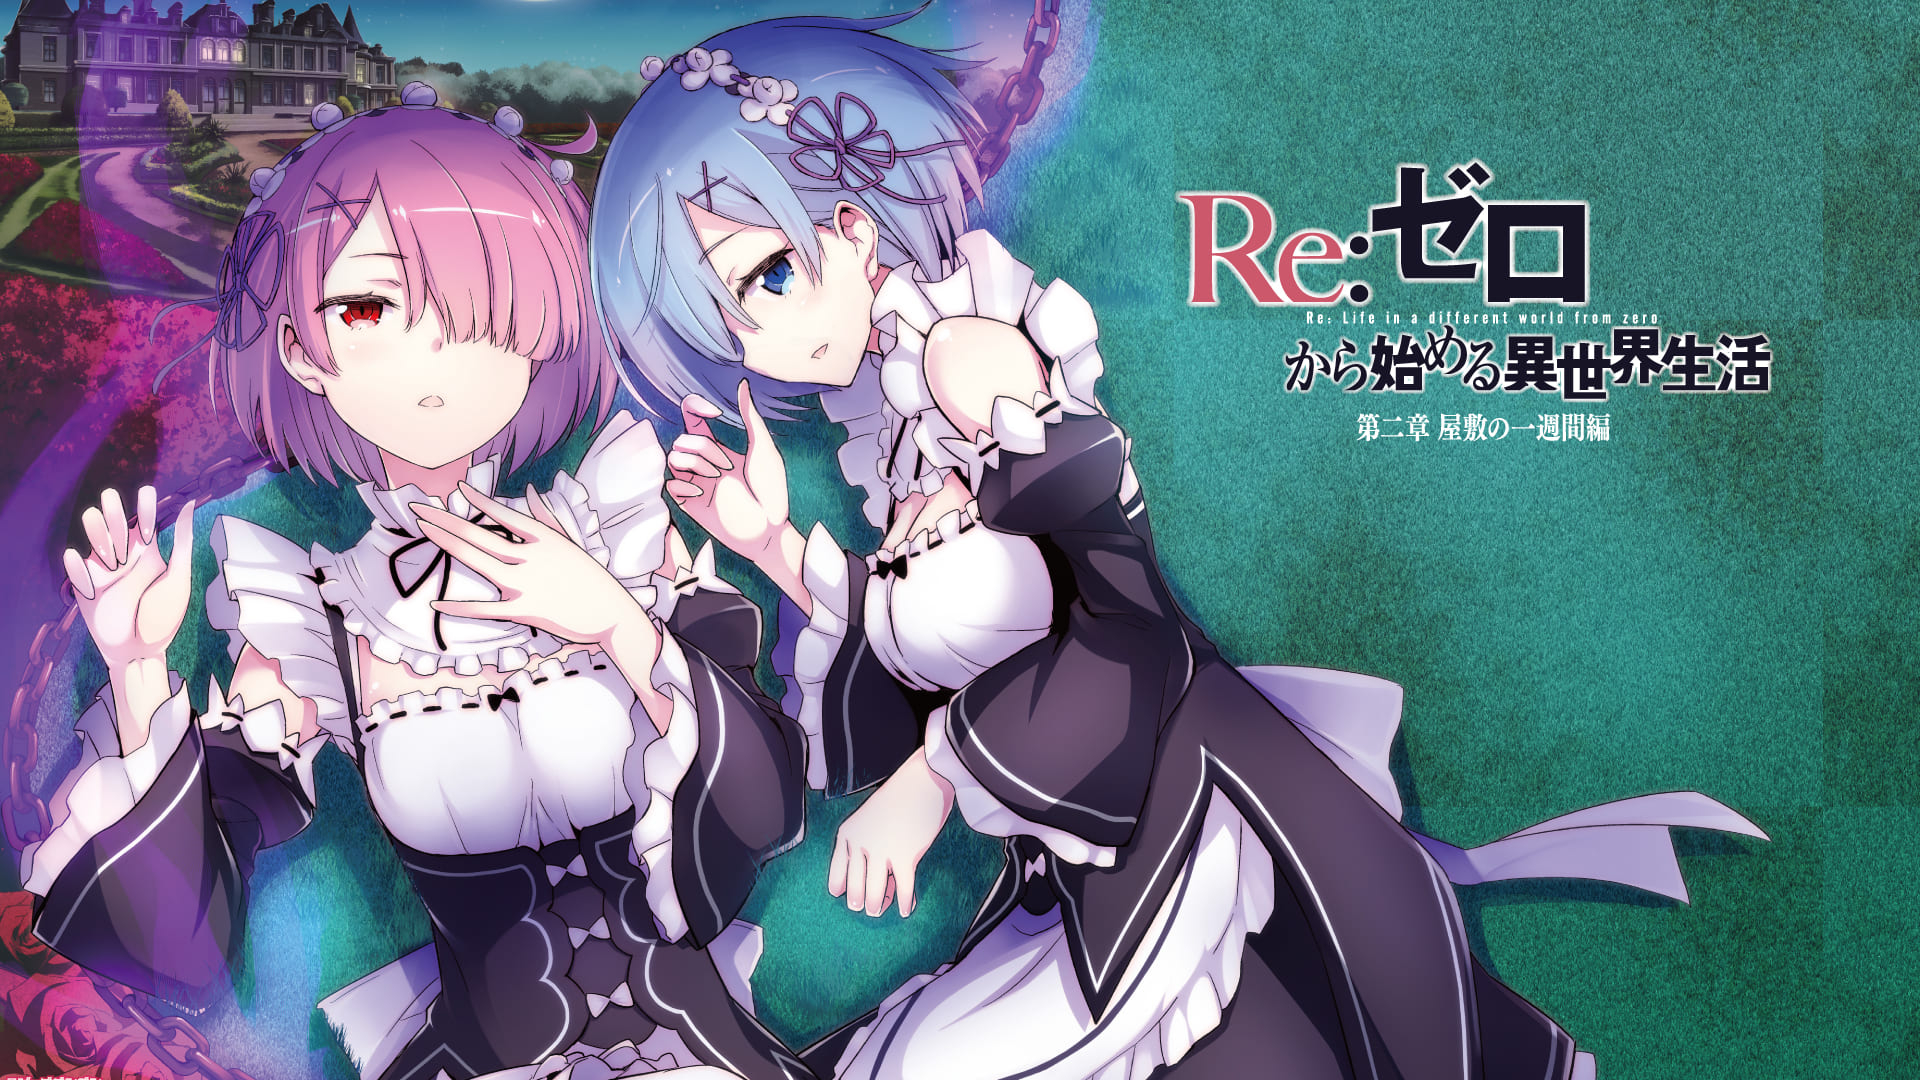 1920x1080 Rem Re Zero Wallpapers : Top Free Rem Re Zero Backgrounds, Pictures \u0026 Images Download